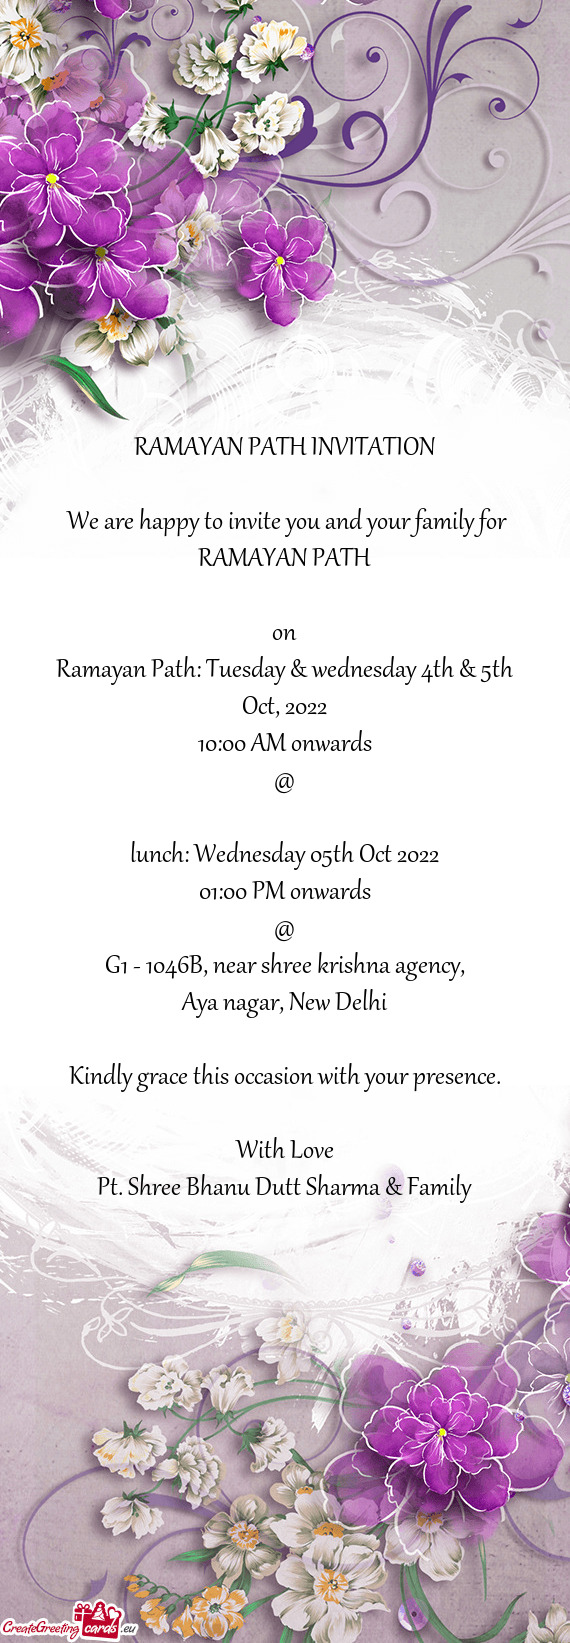 We are happy to invite you and your family for RAMAYAN PATH